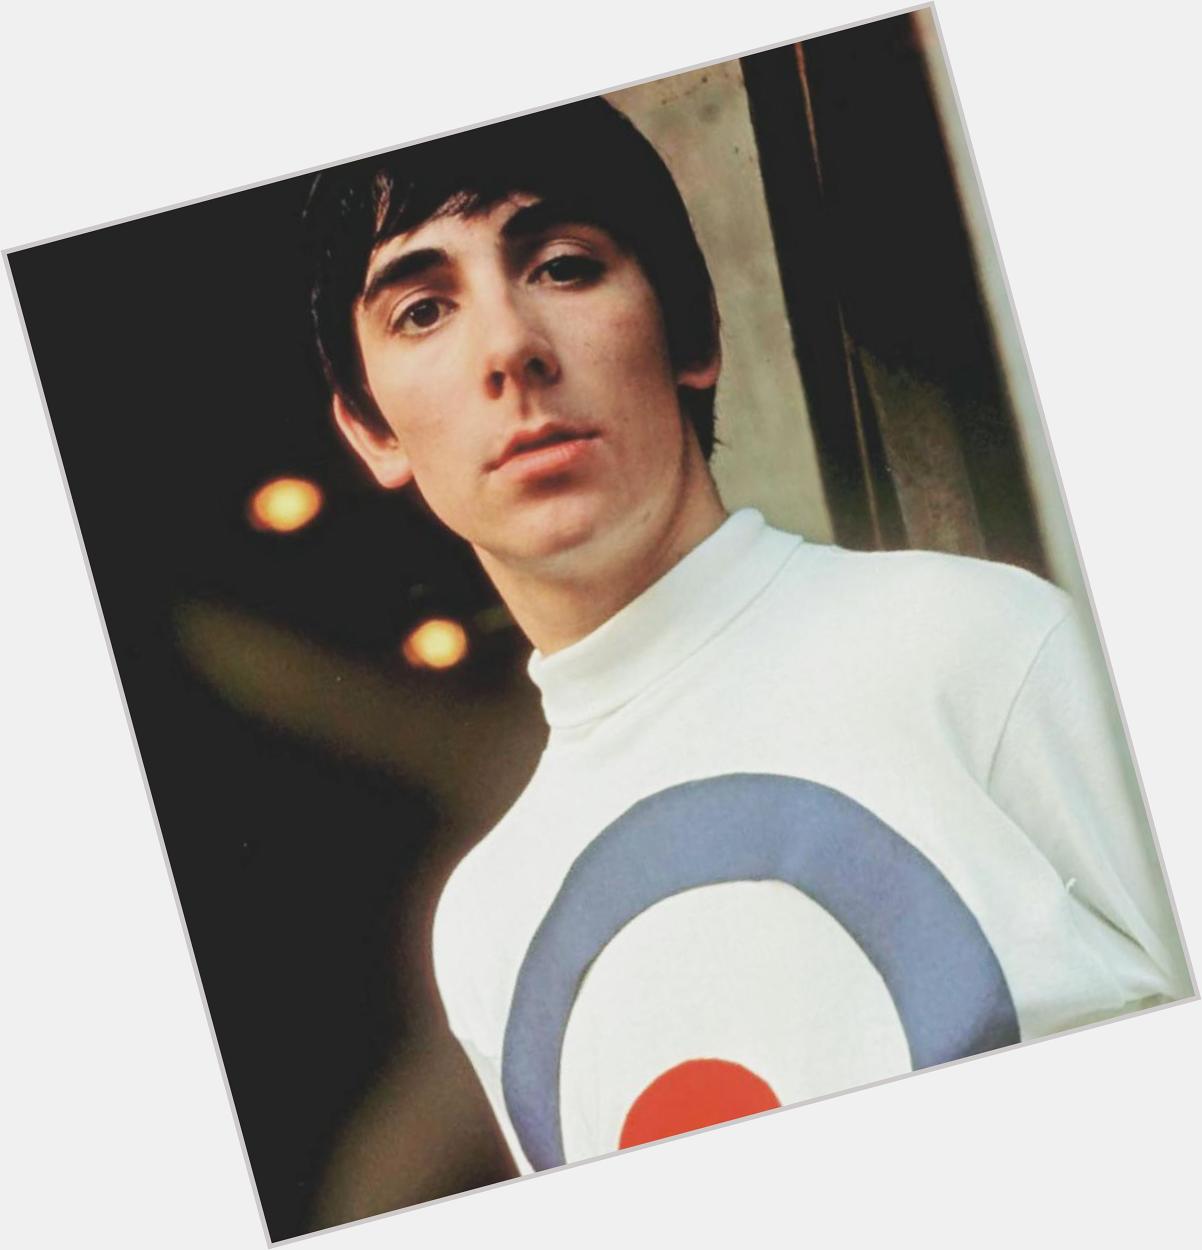 Happy birthday Keith Moon! A fantastic drummer with an amazing personality, rest in peace Keith 